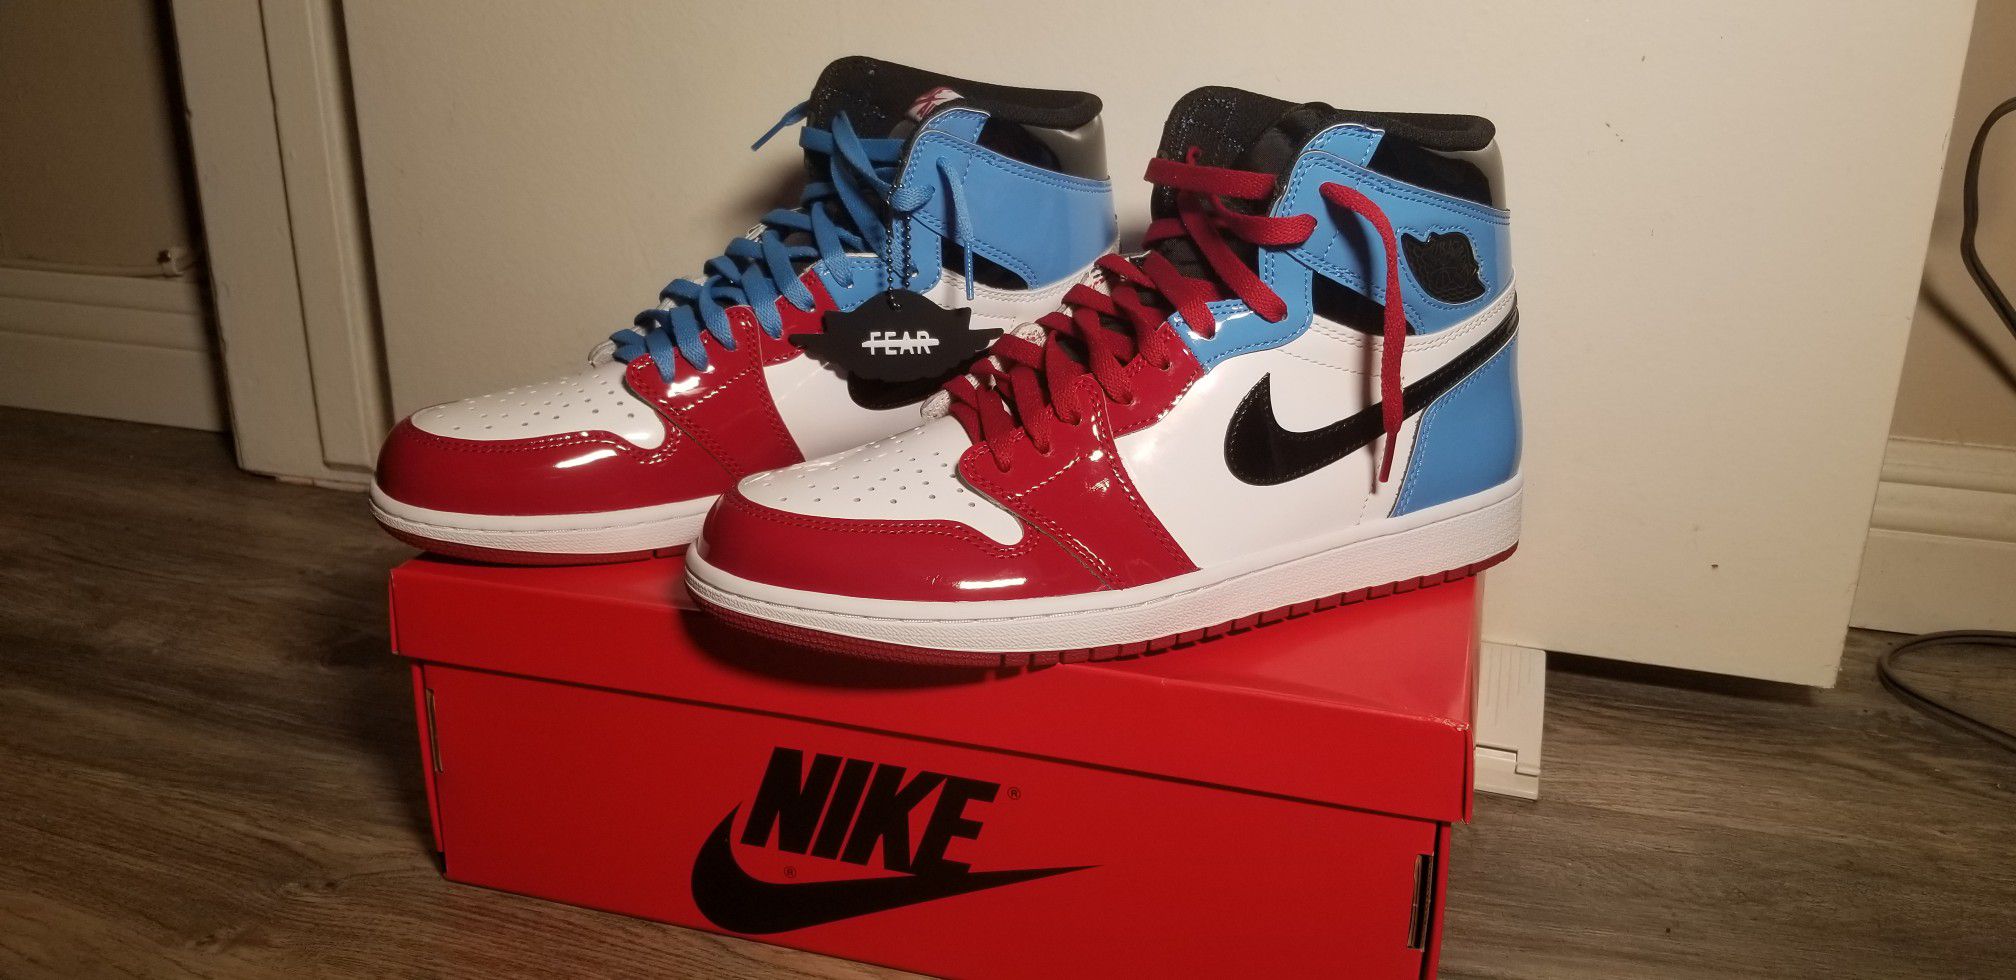 Jordan 1 NC to CHI Fearless size 11